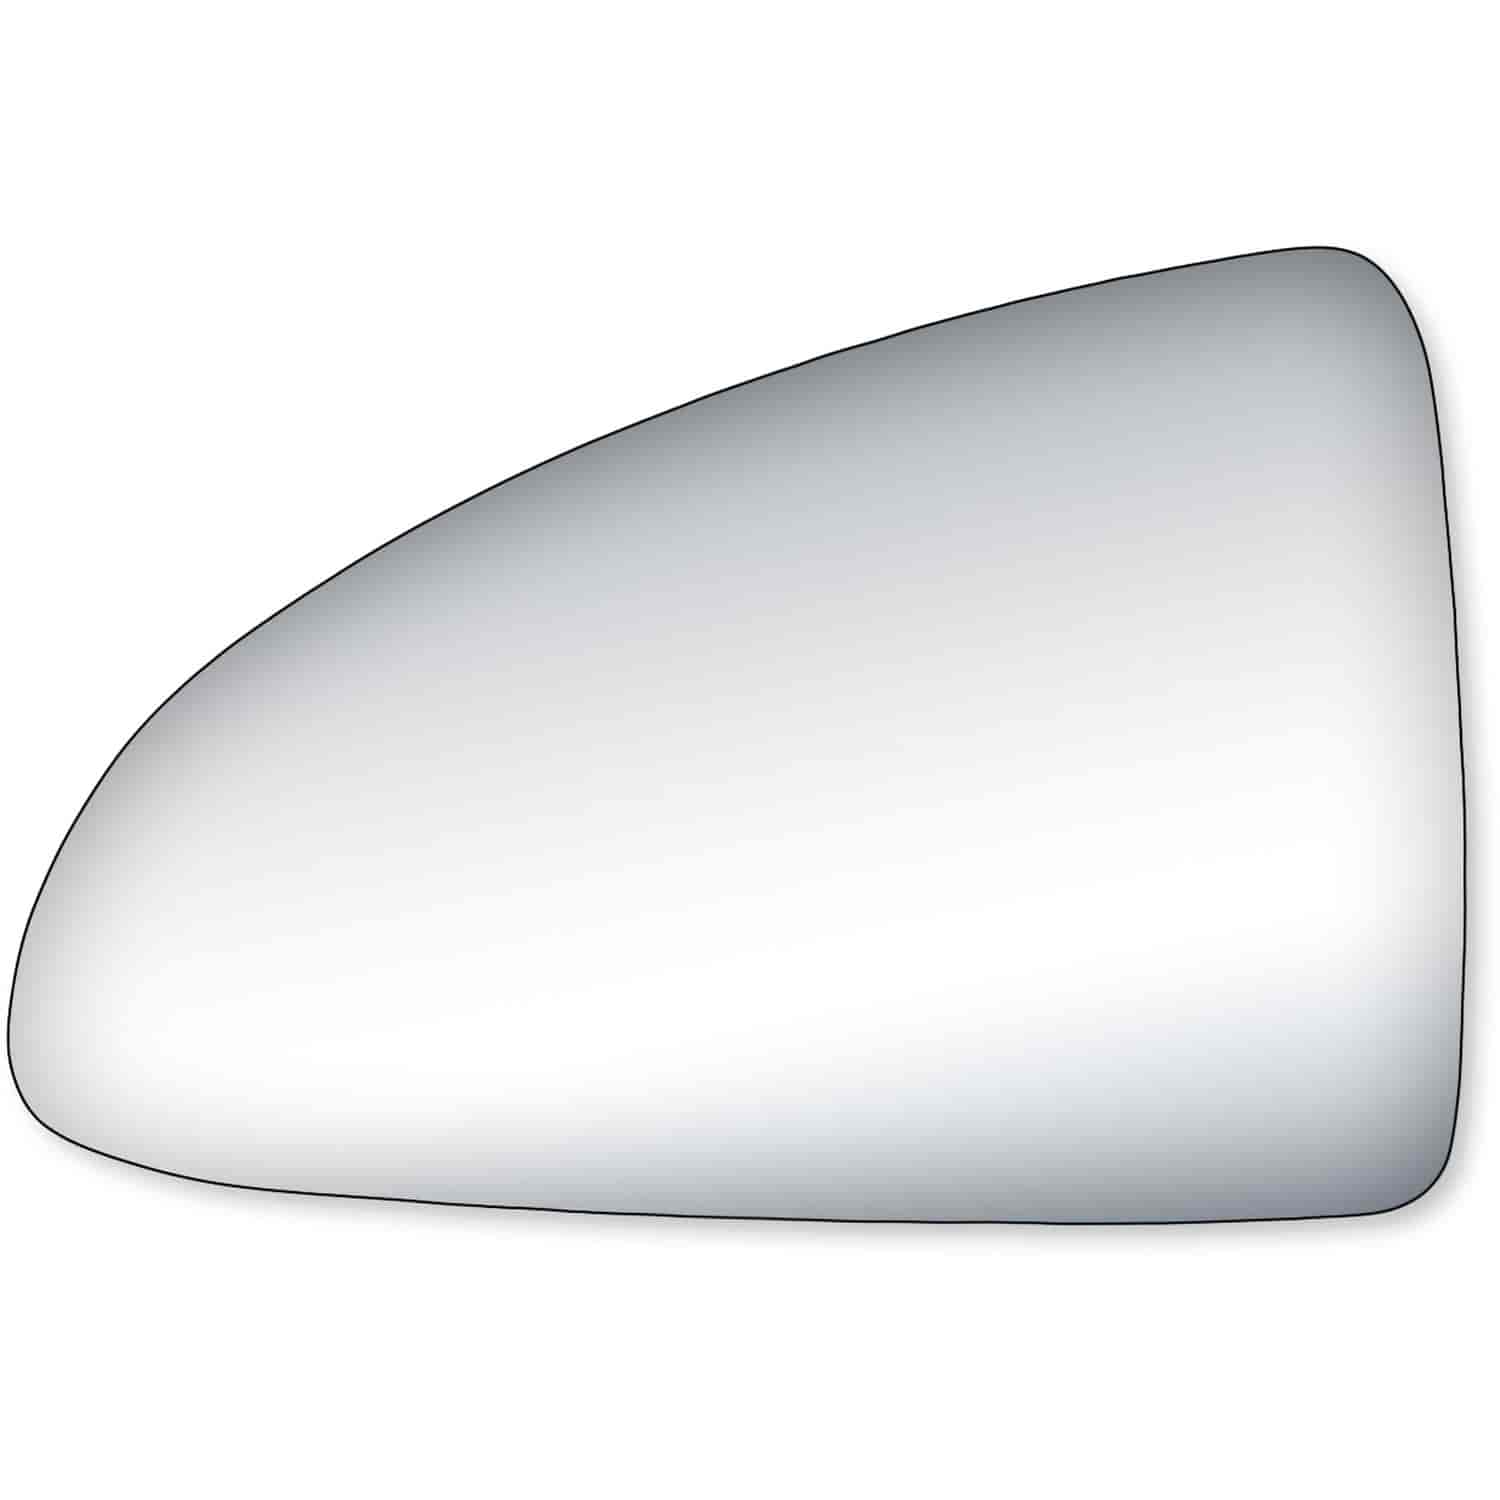 Replacement Glass for 04-08 Malibu Base/ LS/ LT; 05-10 G6 Coupe/ Sedan the glass measures 4 3/4 tall